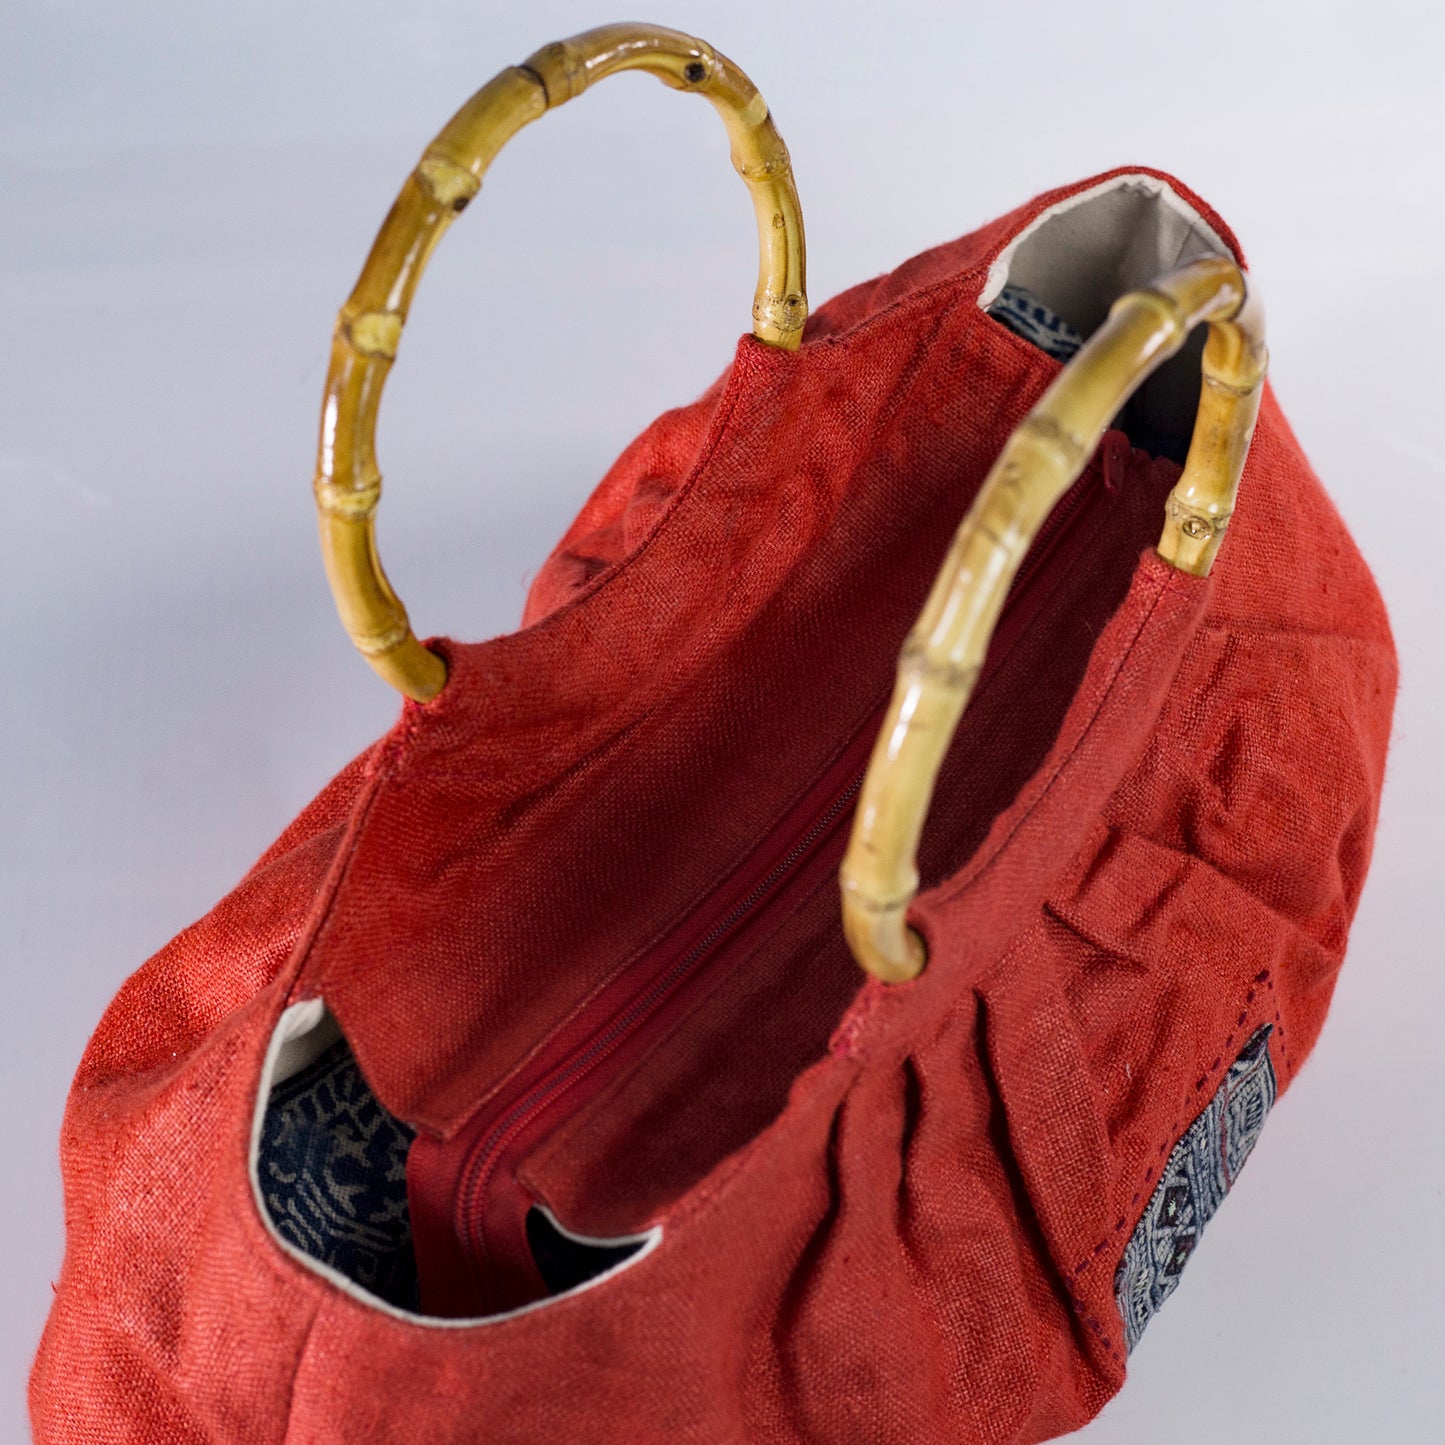 Bamboo handle bag, natural hemp in RED with vintage patch